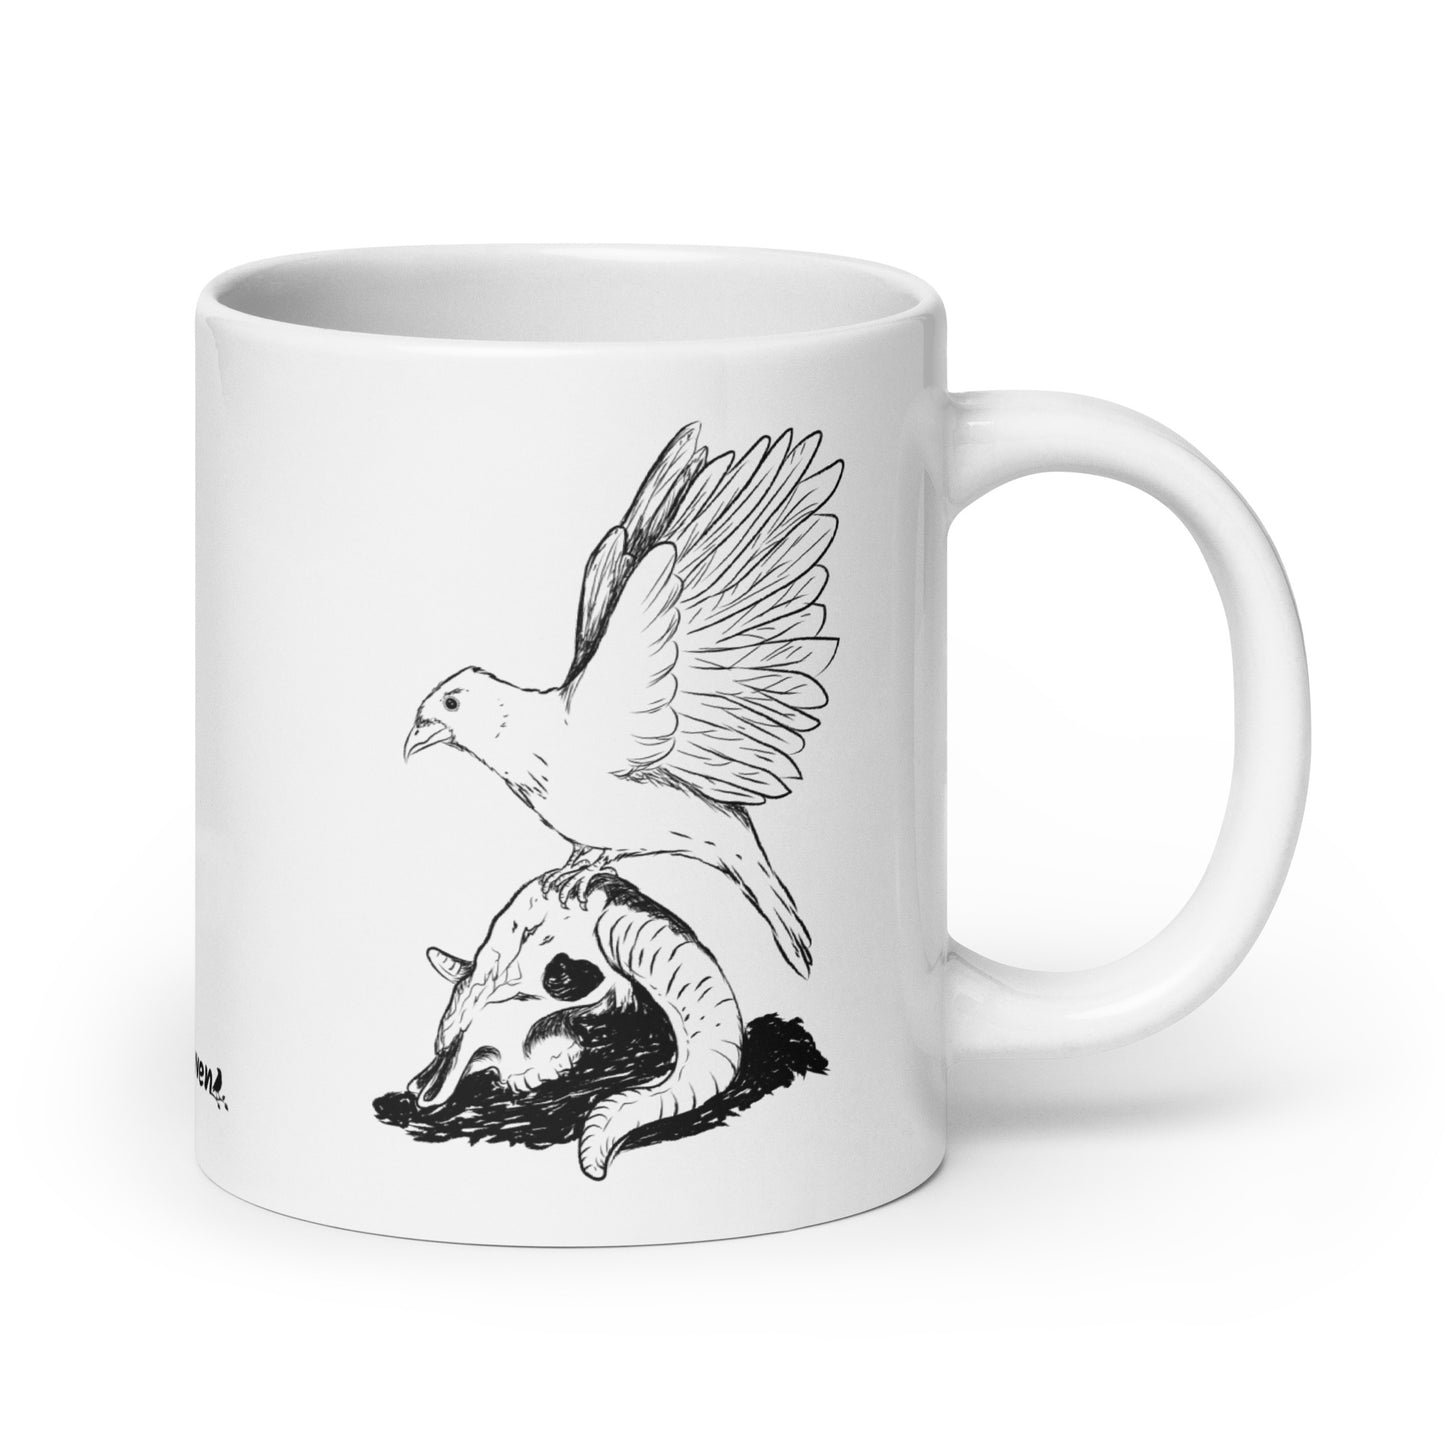 20 ounce white glossy mug featuring double sided print of Reflections, a design with a crow with wings outstretched on a sheep skull.